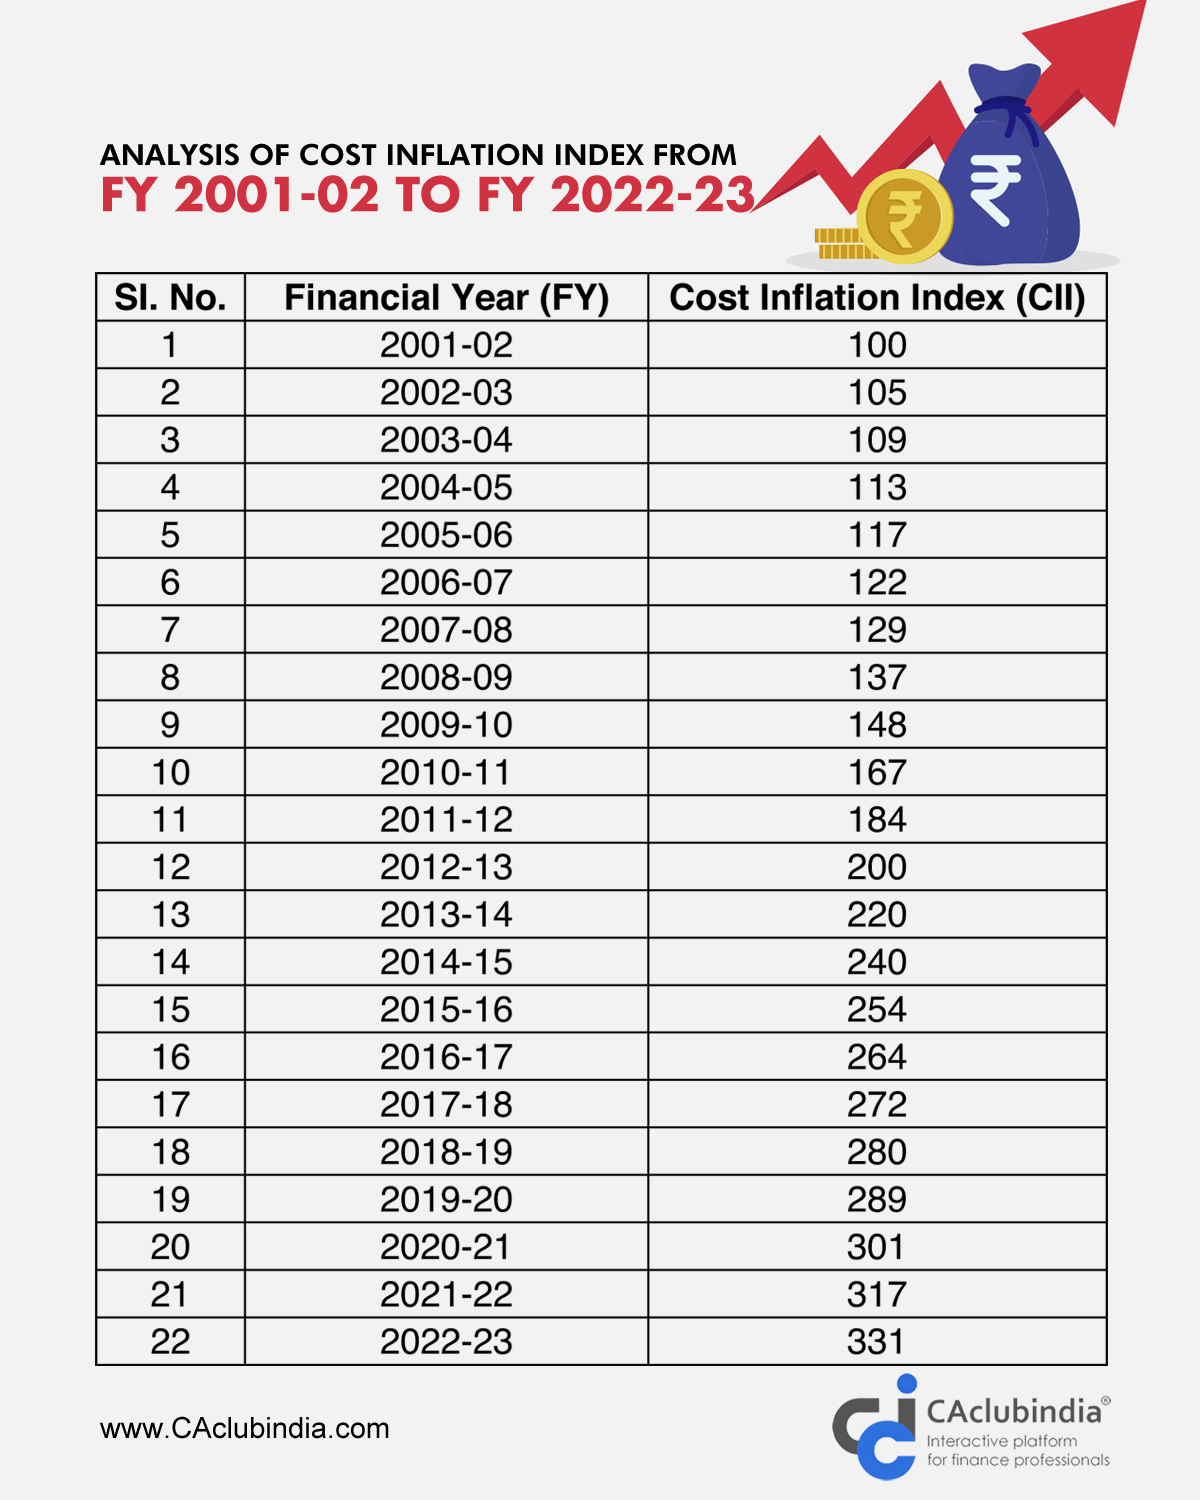 CII throughout these years from FY (2001-02) to FY (2022-23)